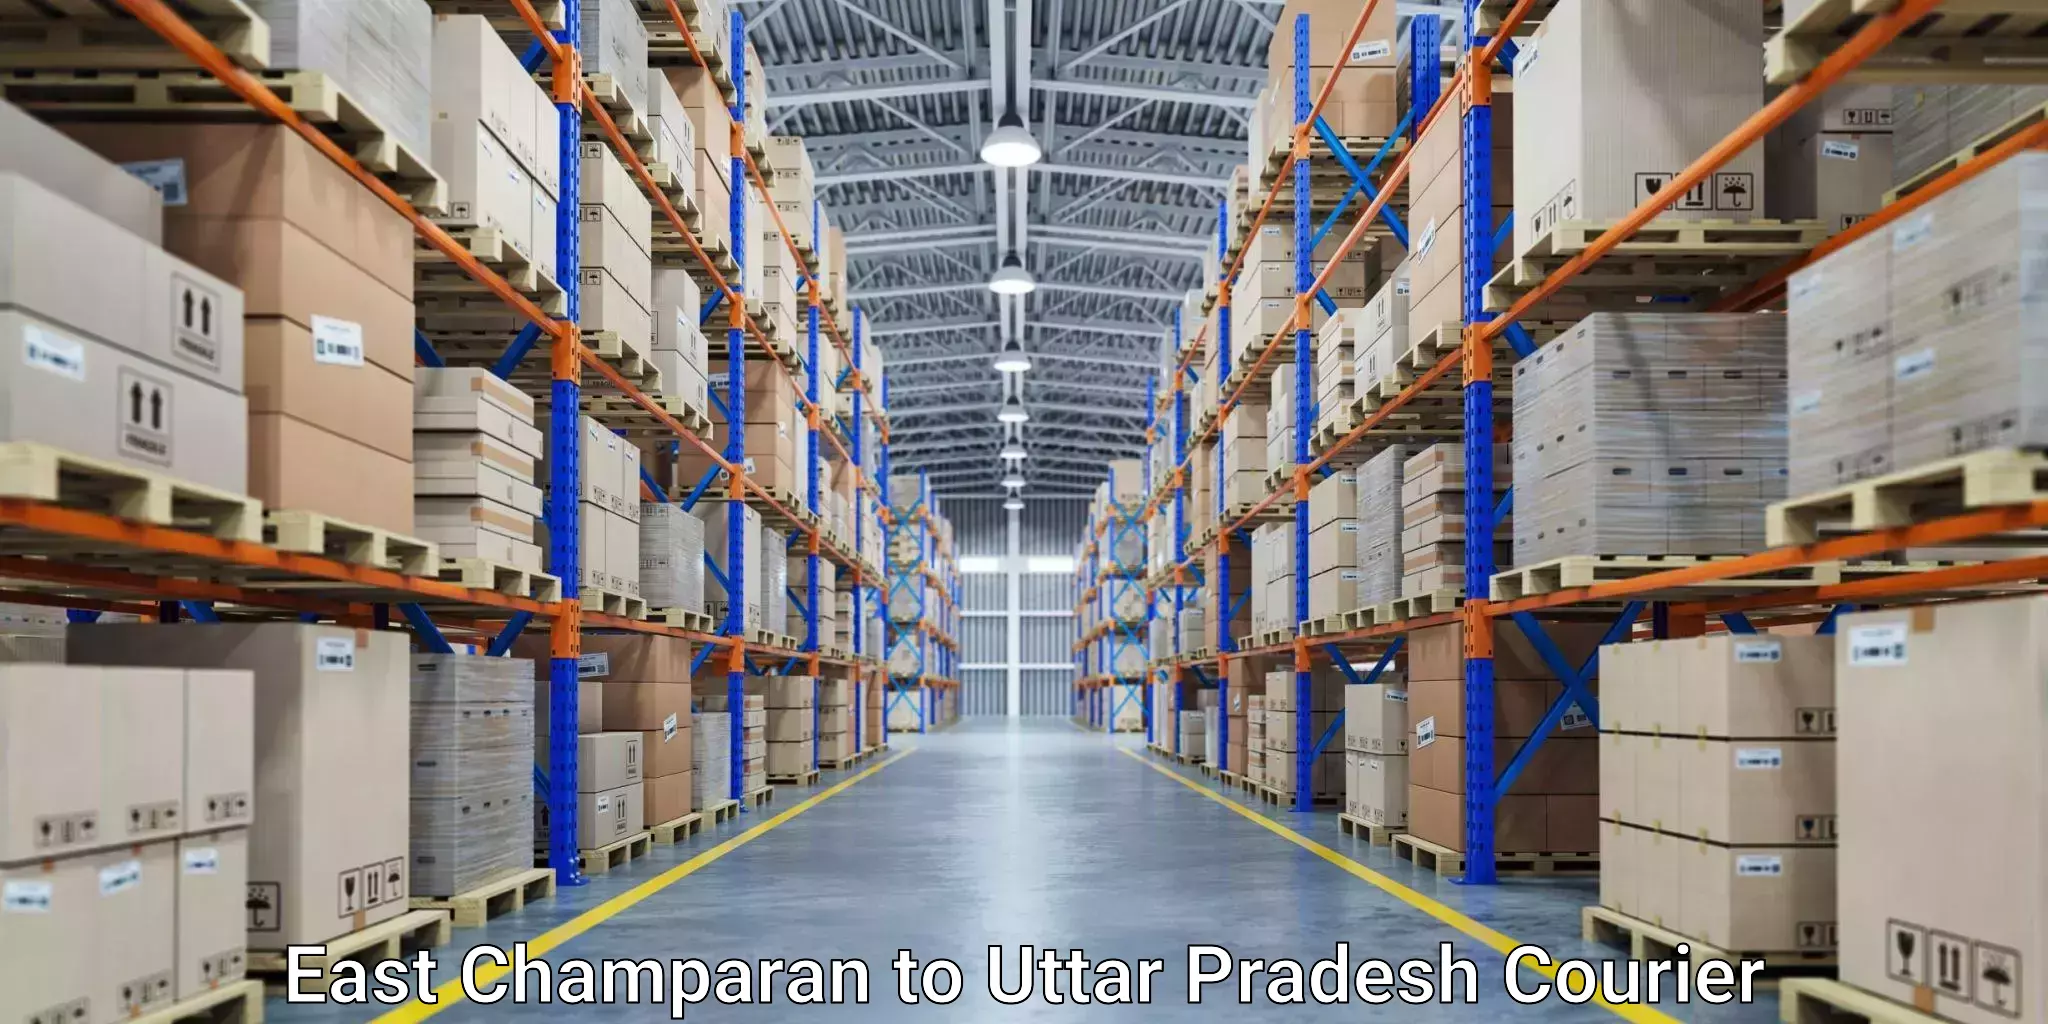 Comprehensive shipping network East Champaran to Anpara